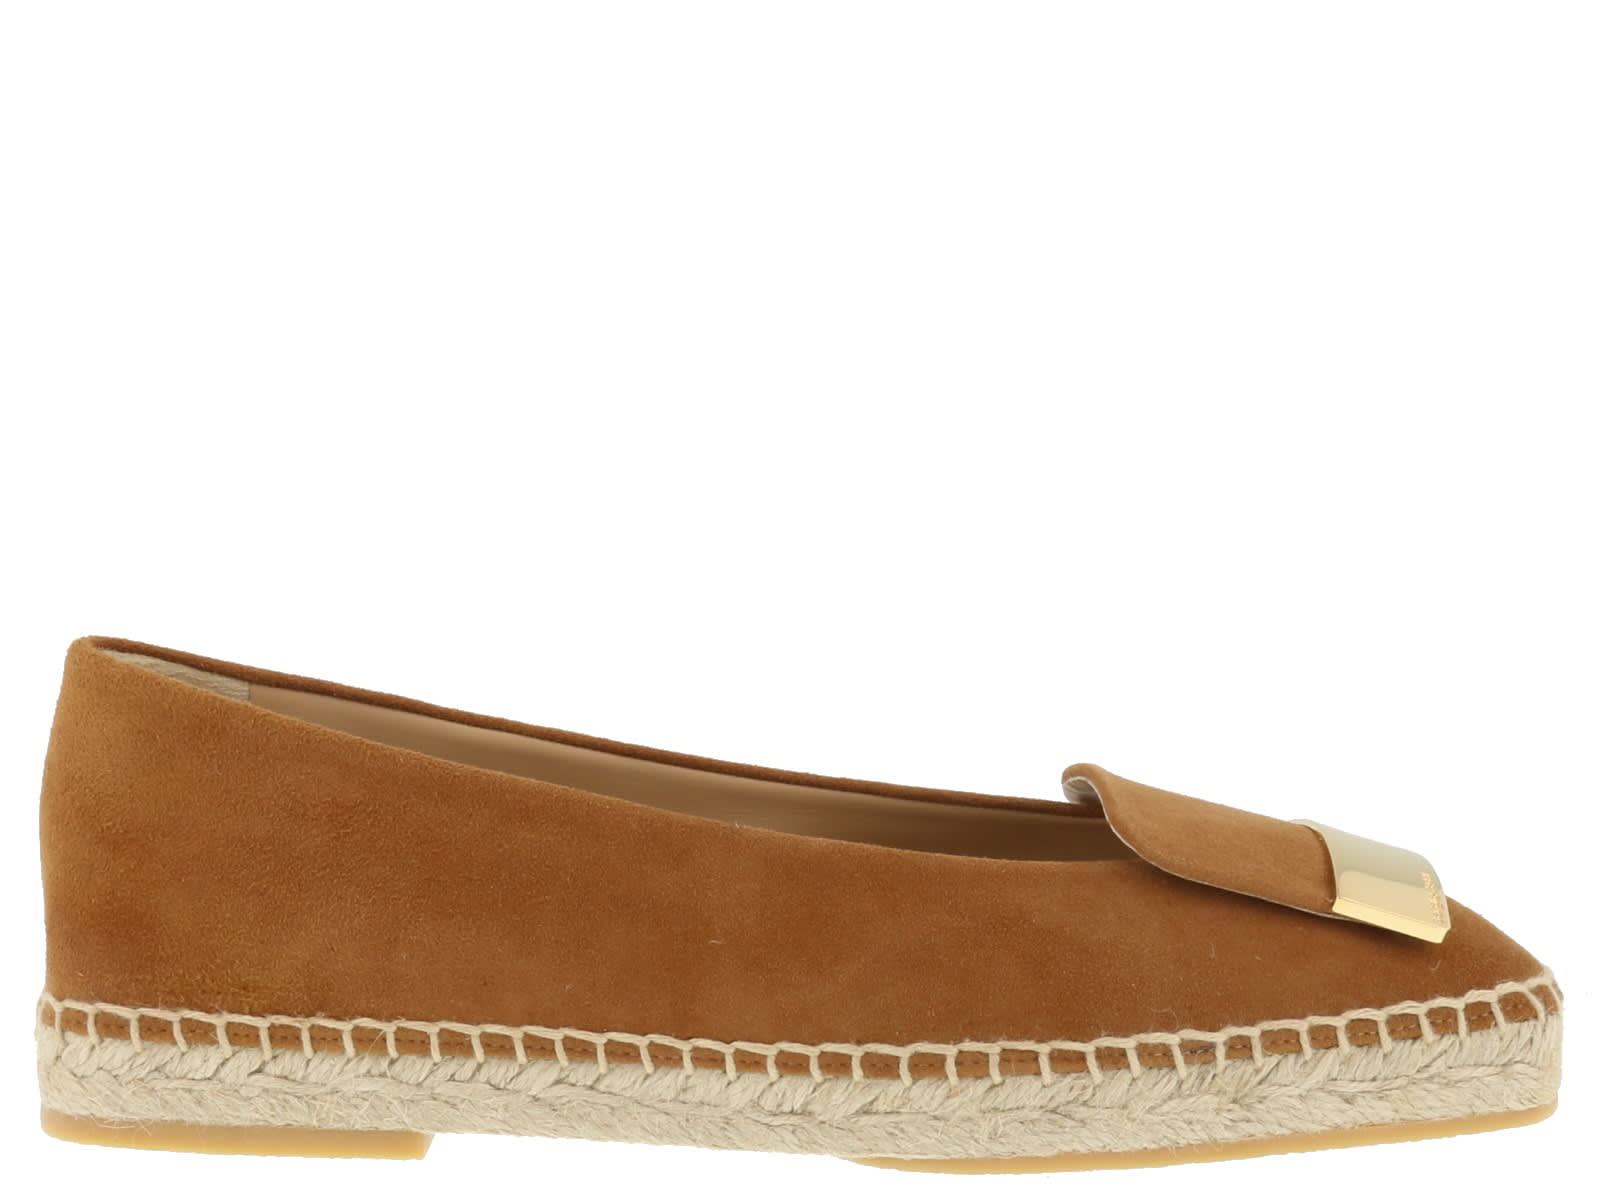 Buy Sergio Rossi Sr1 Espadrilles online, shop Sergio Rossi shoes with free shipping